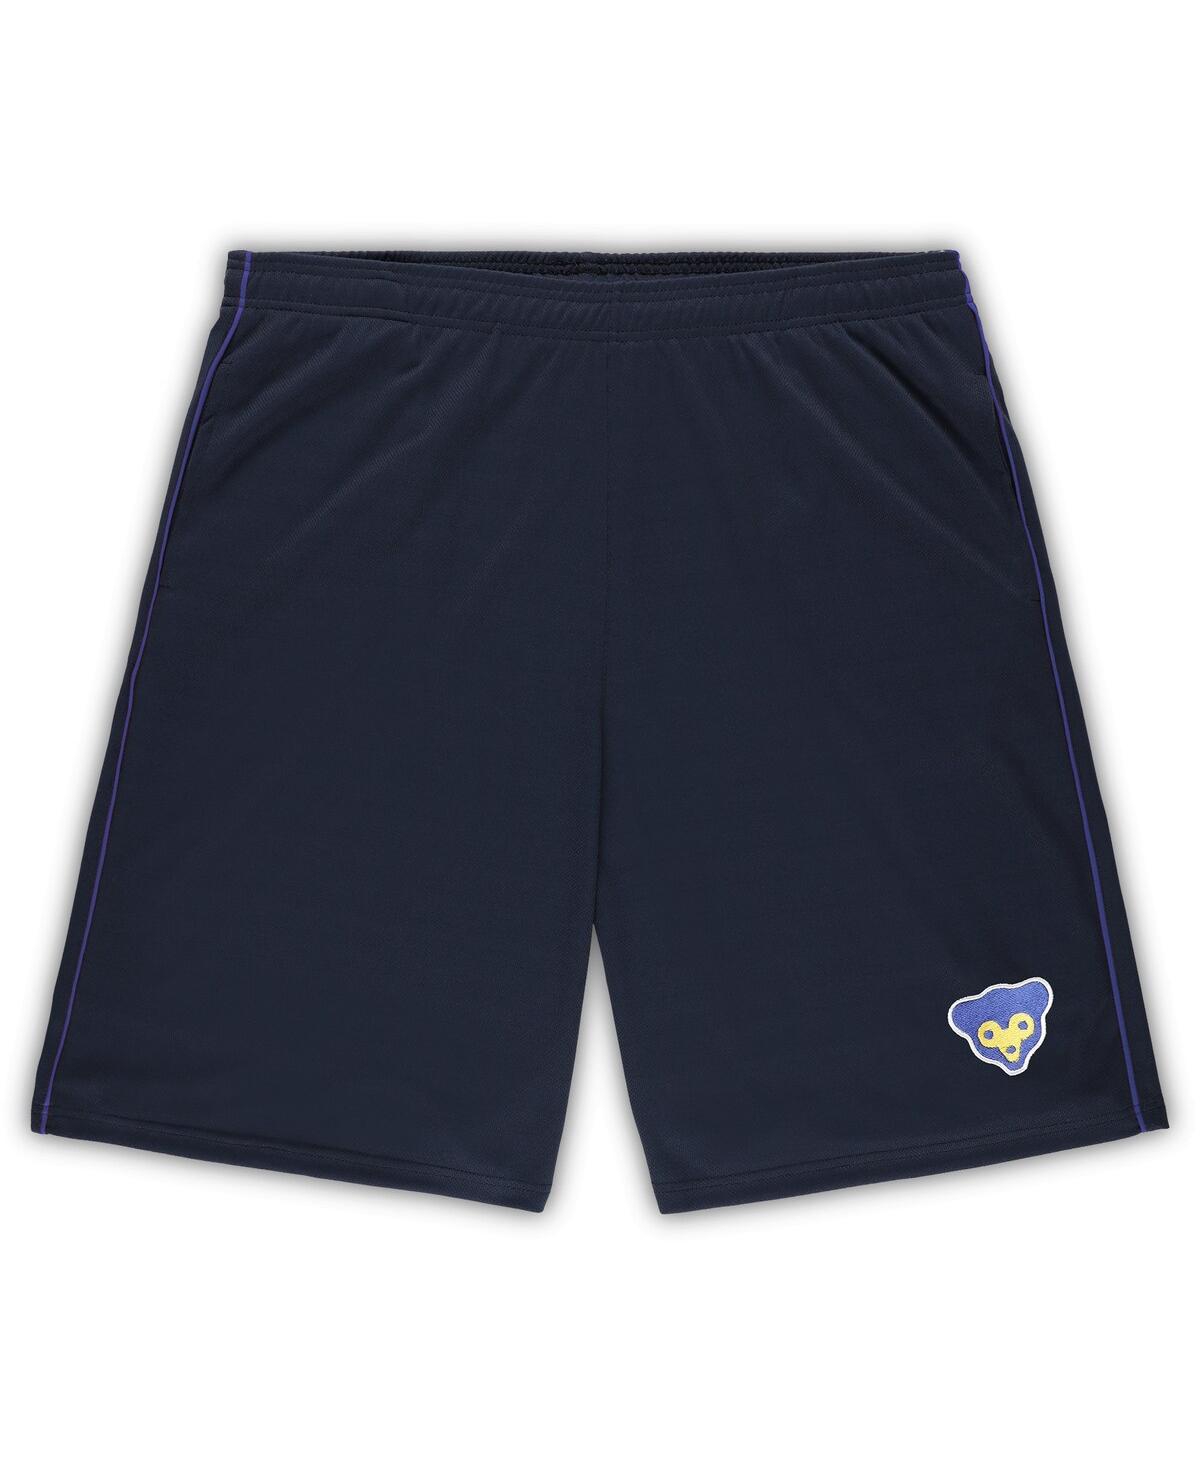 PROFILE MEN'S PROFILE NAVY DISTRESSED CHICAGO CUBS BIG AND TALL COOPERSTOWN COLLECTION MESH SHORTS